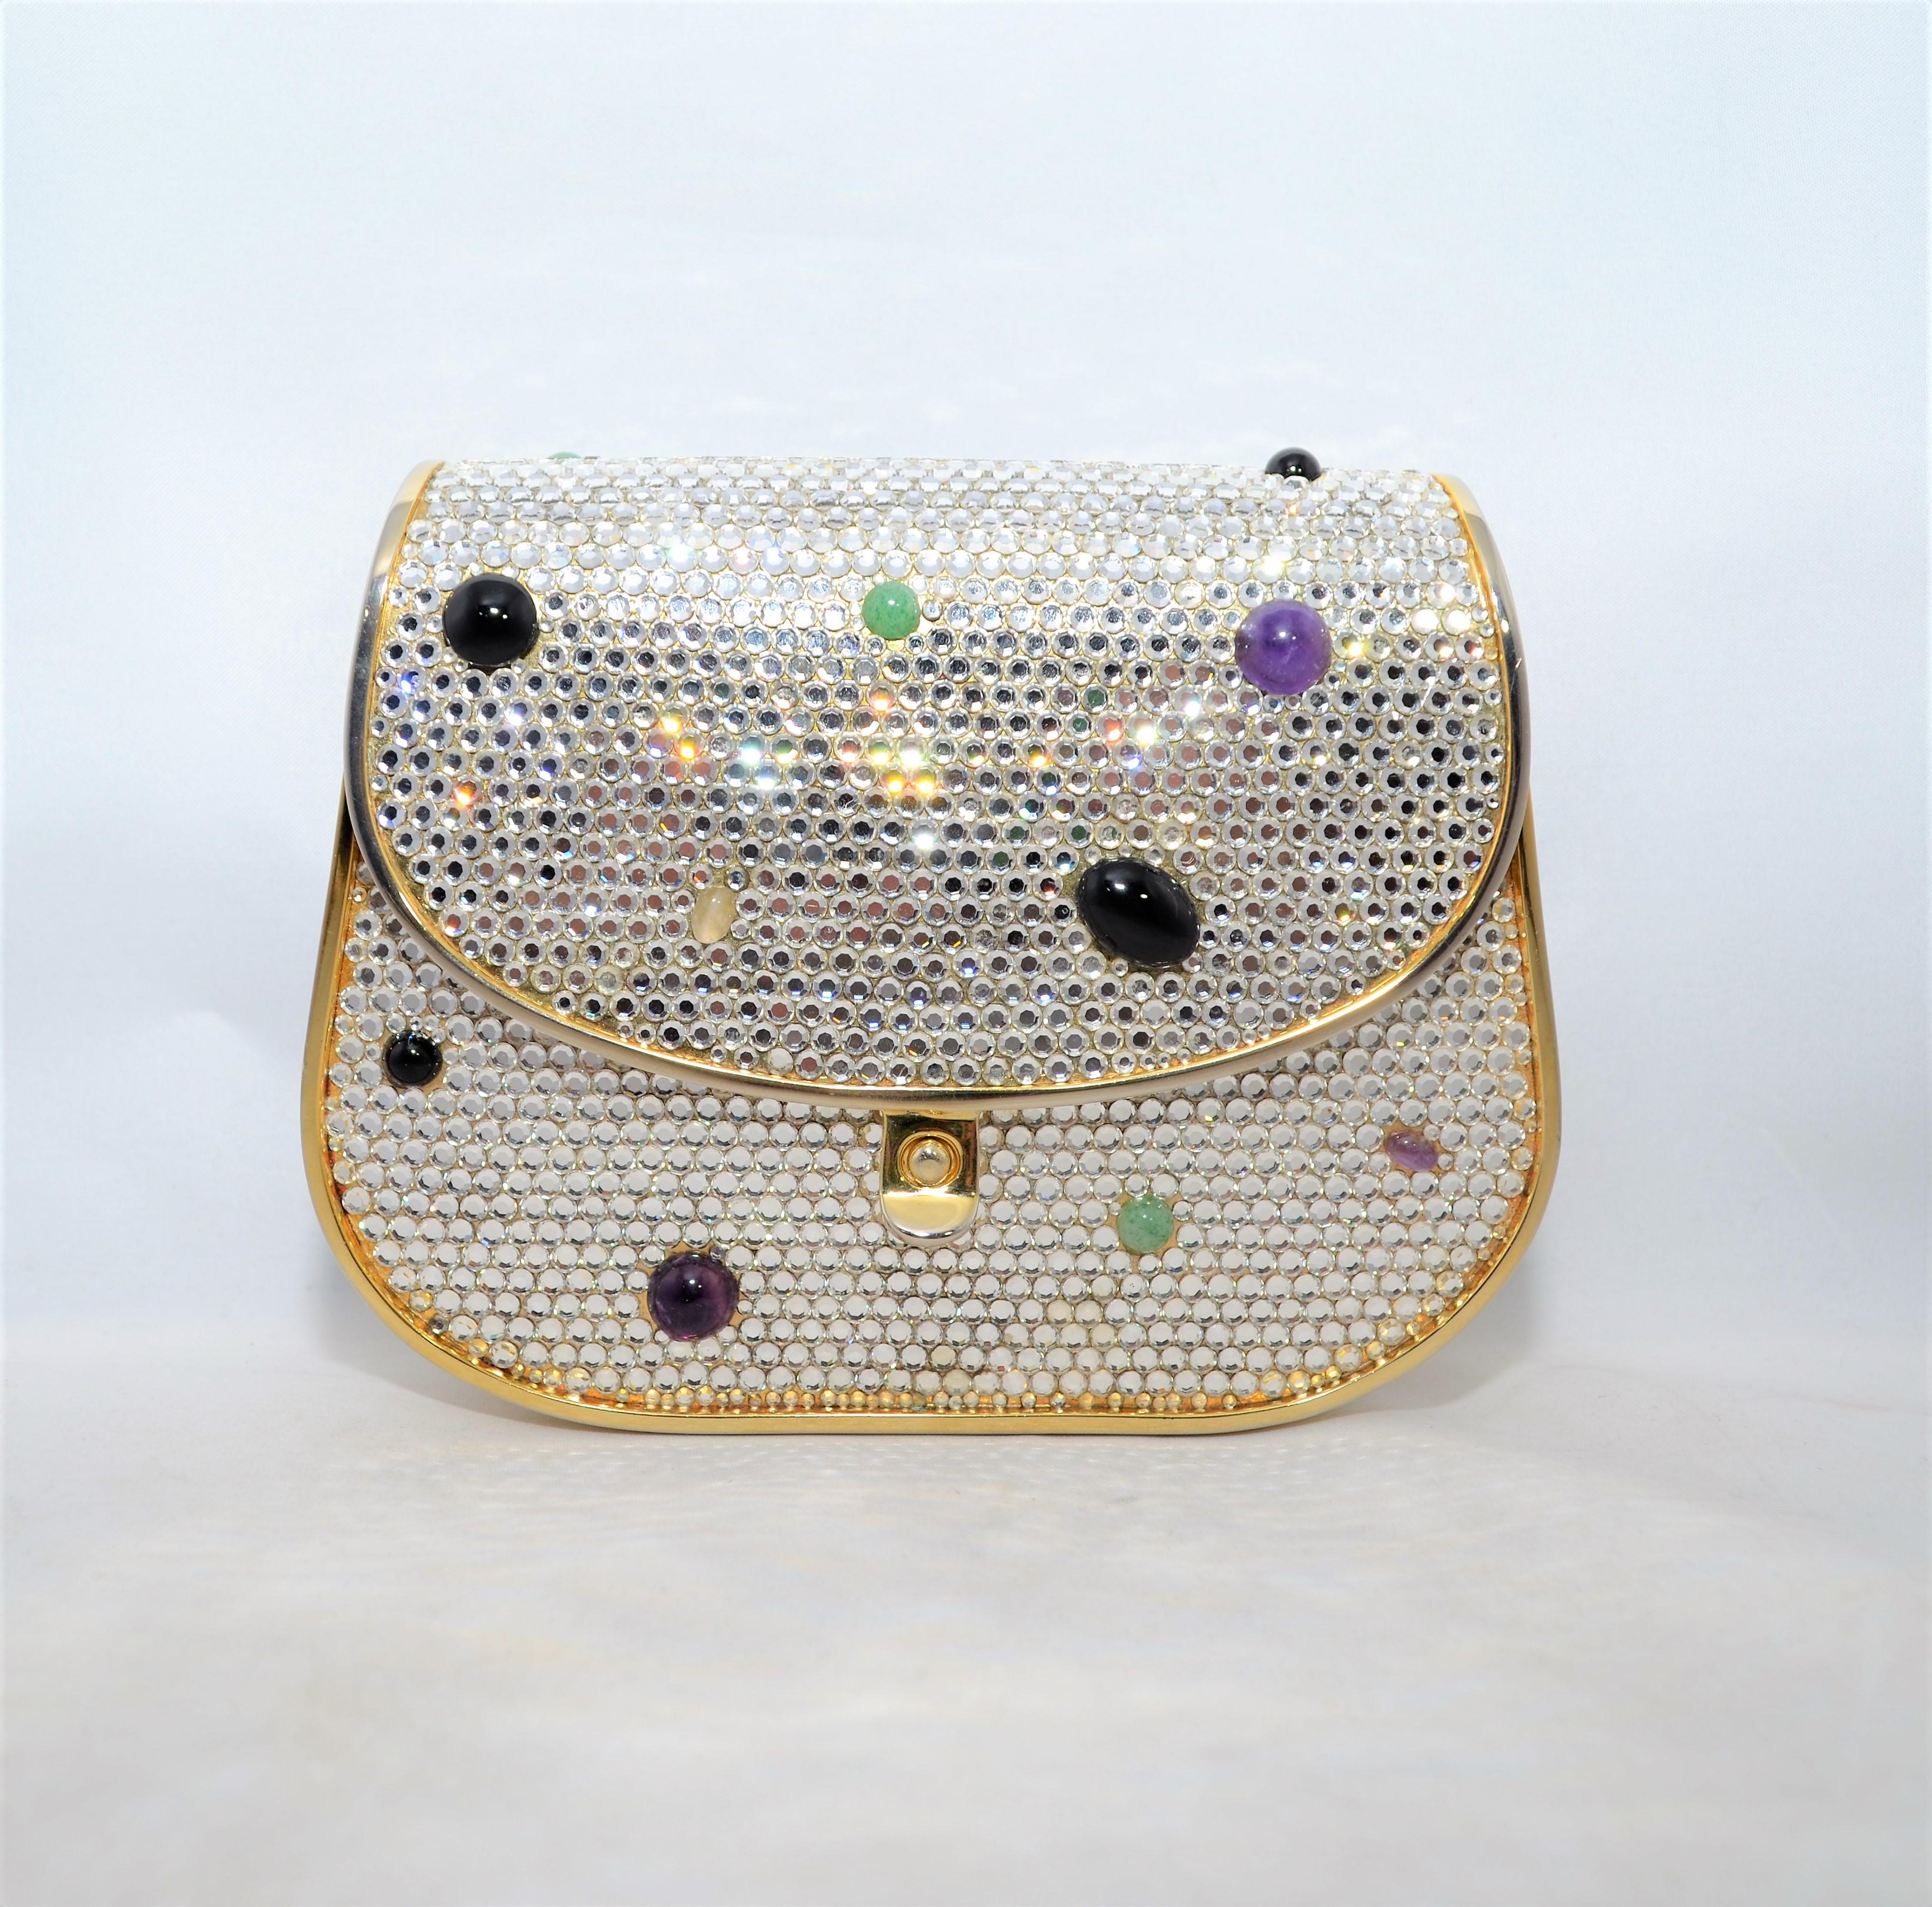 Judith Leiber Swarovski Crystal Minaudiere -- featured is a beautiful Judith Leiber minaudiere encrusted with swarovski crystals and semi-precious stones on a gold-tone metal frame with a flap closure. Minaudiere has a leather lining and an optional